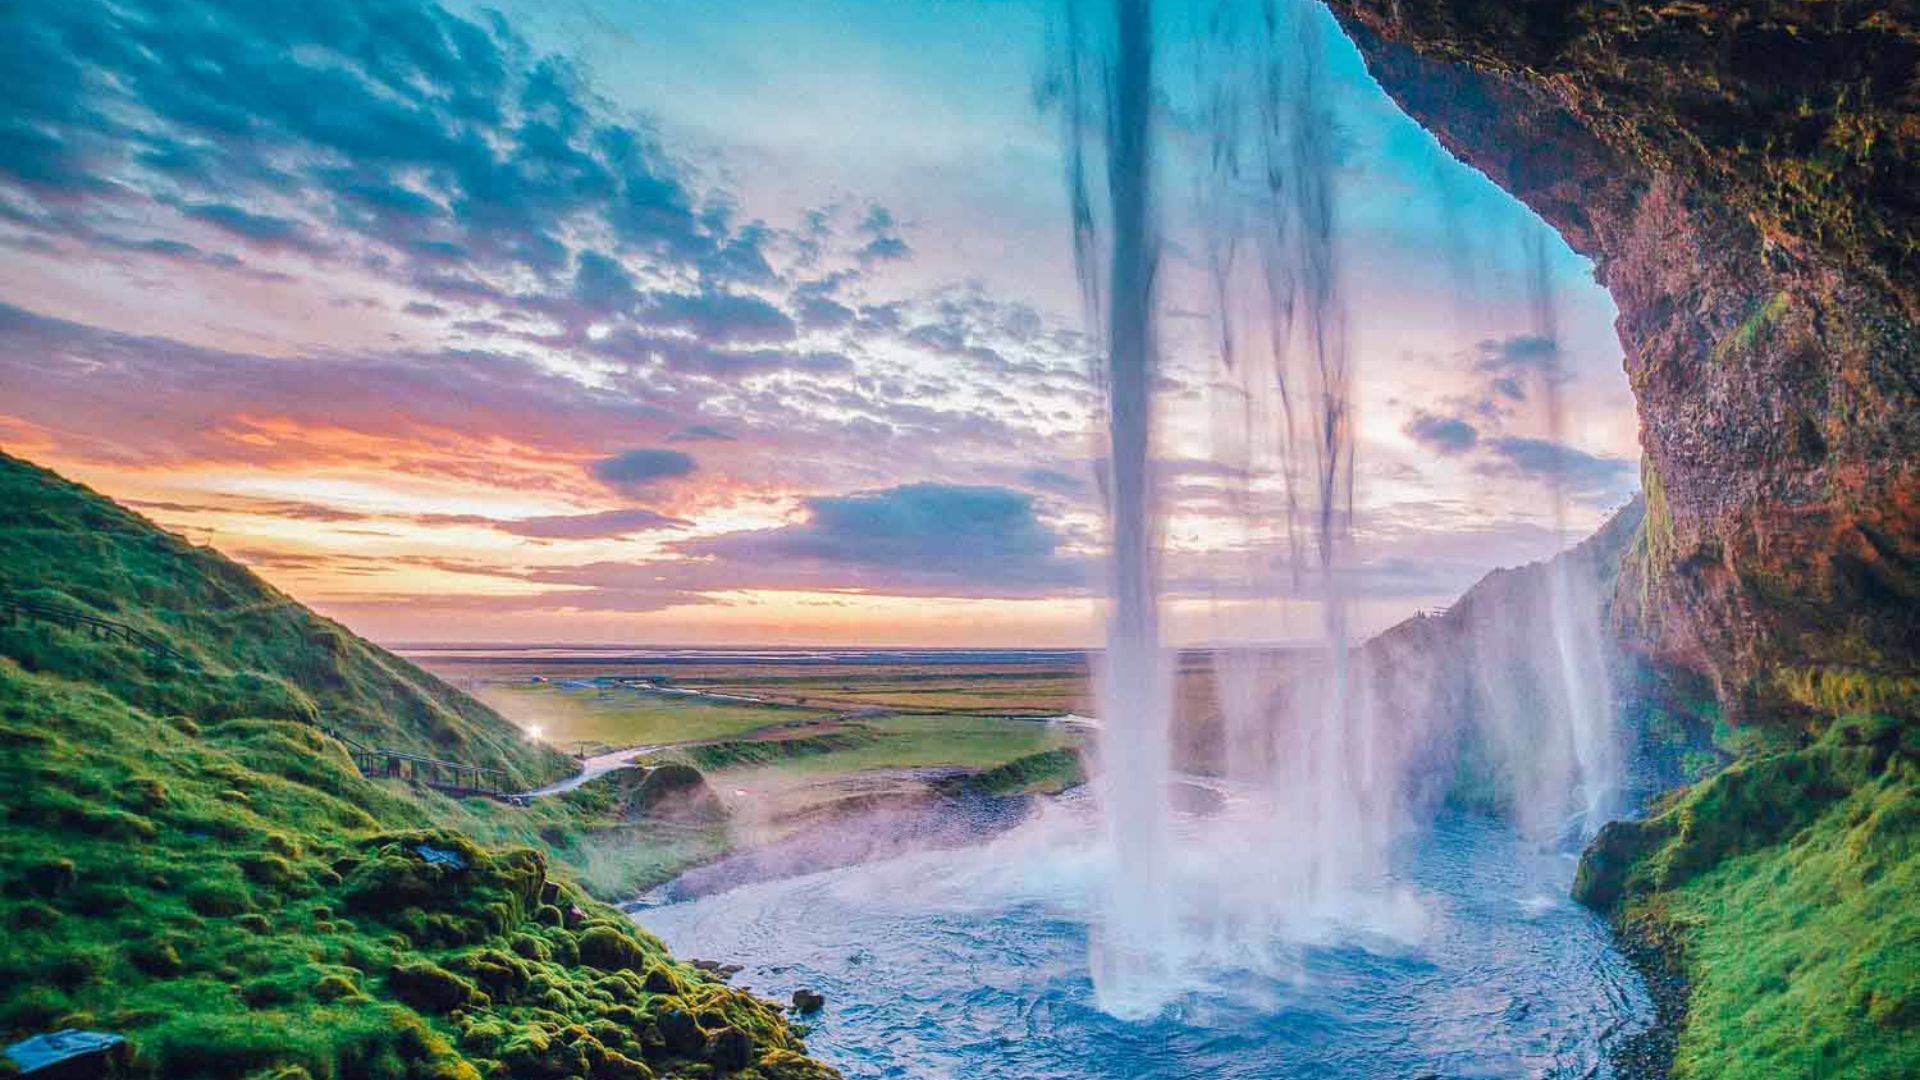 Seljalandsfoss is a famous Icelandic waterfall on the South Coast. You can walk behind this waterfall.